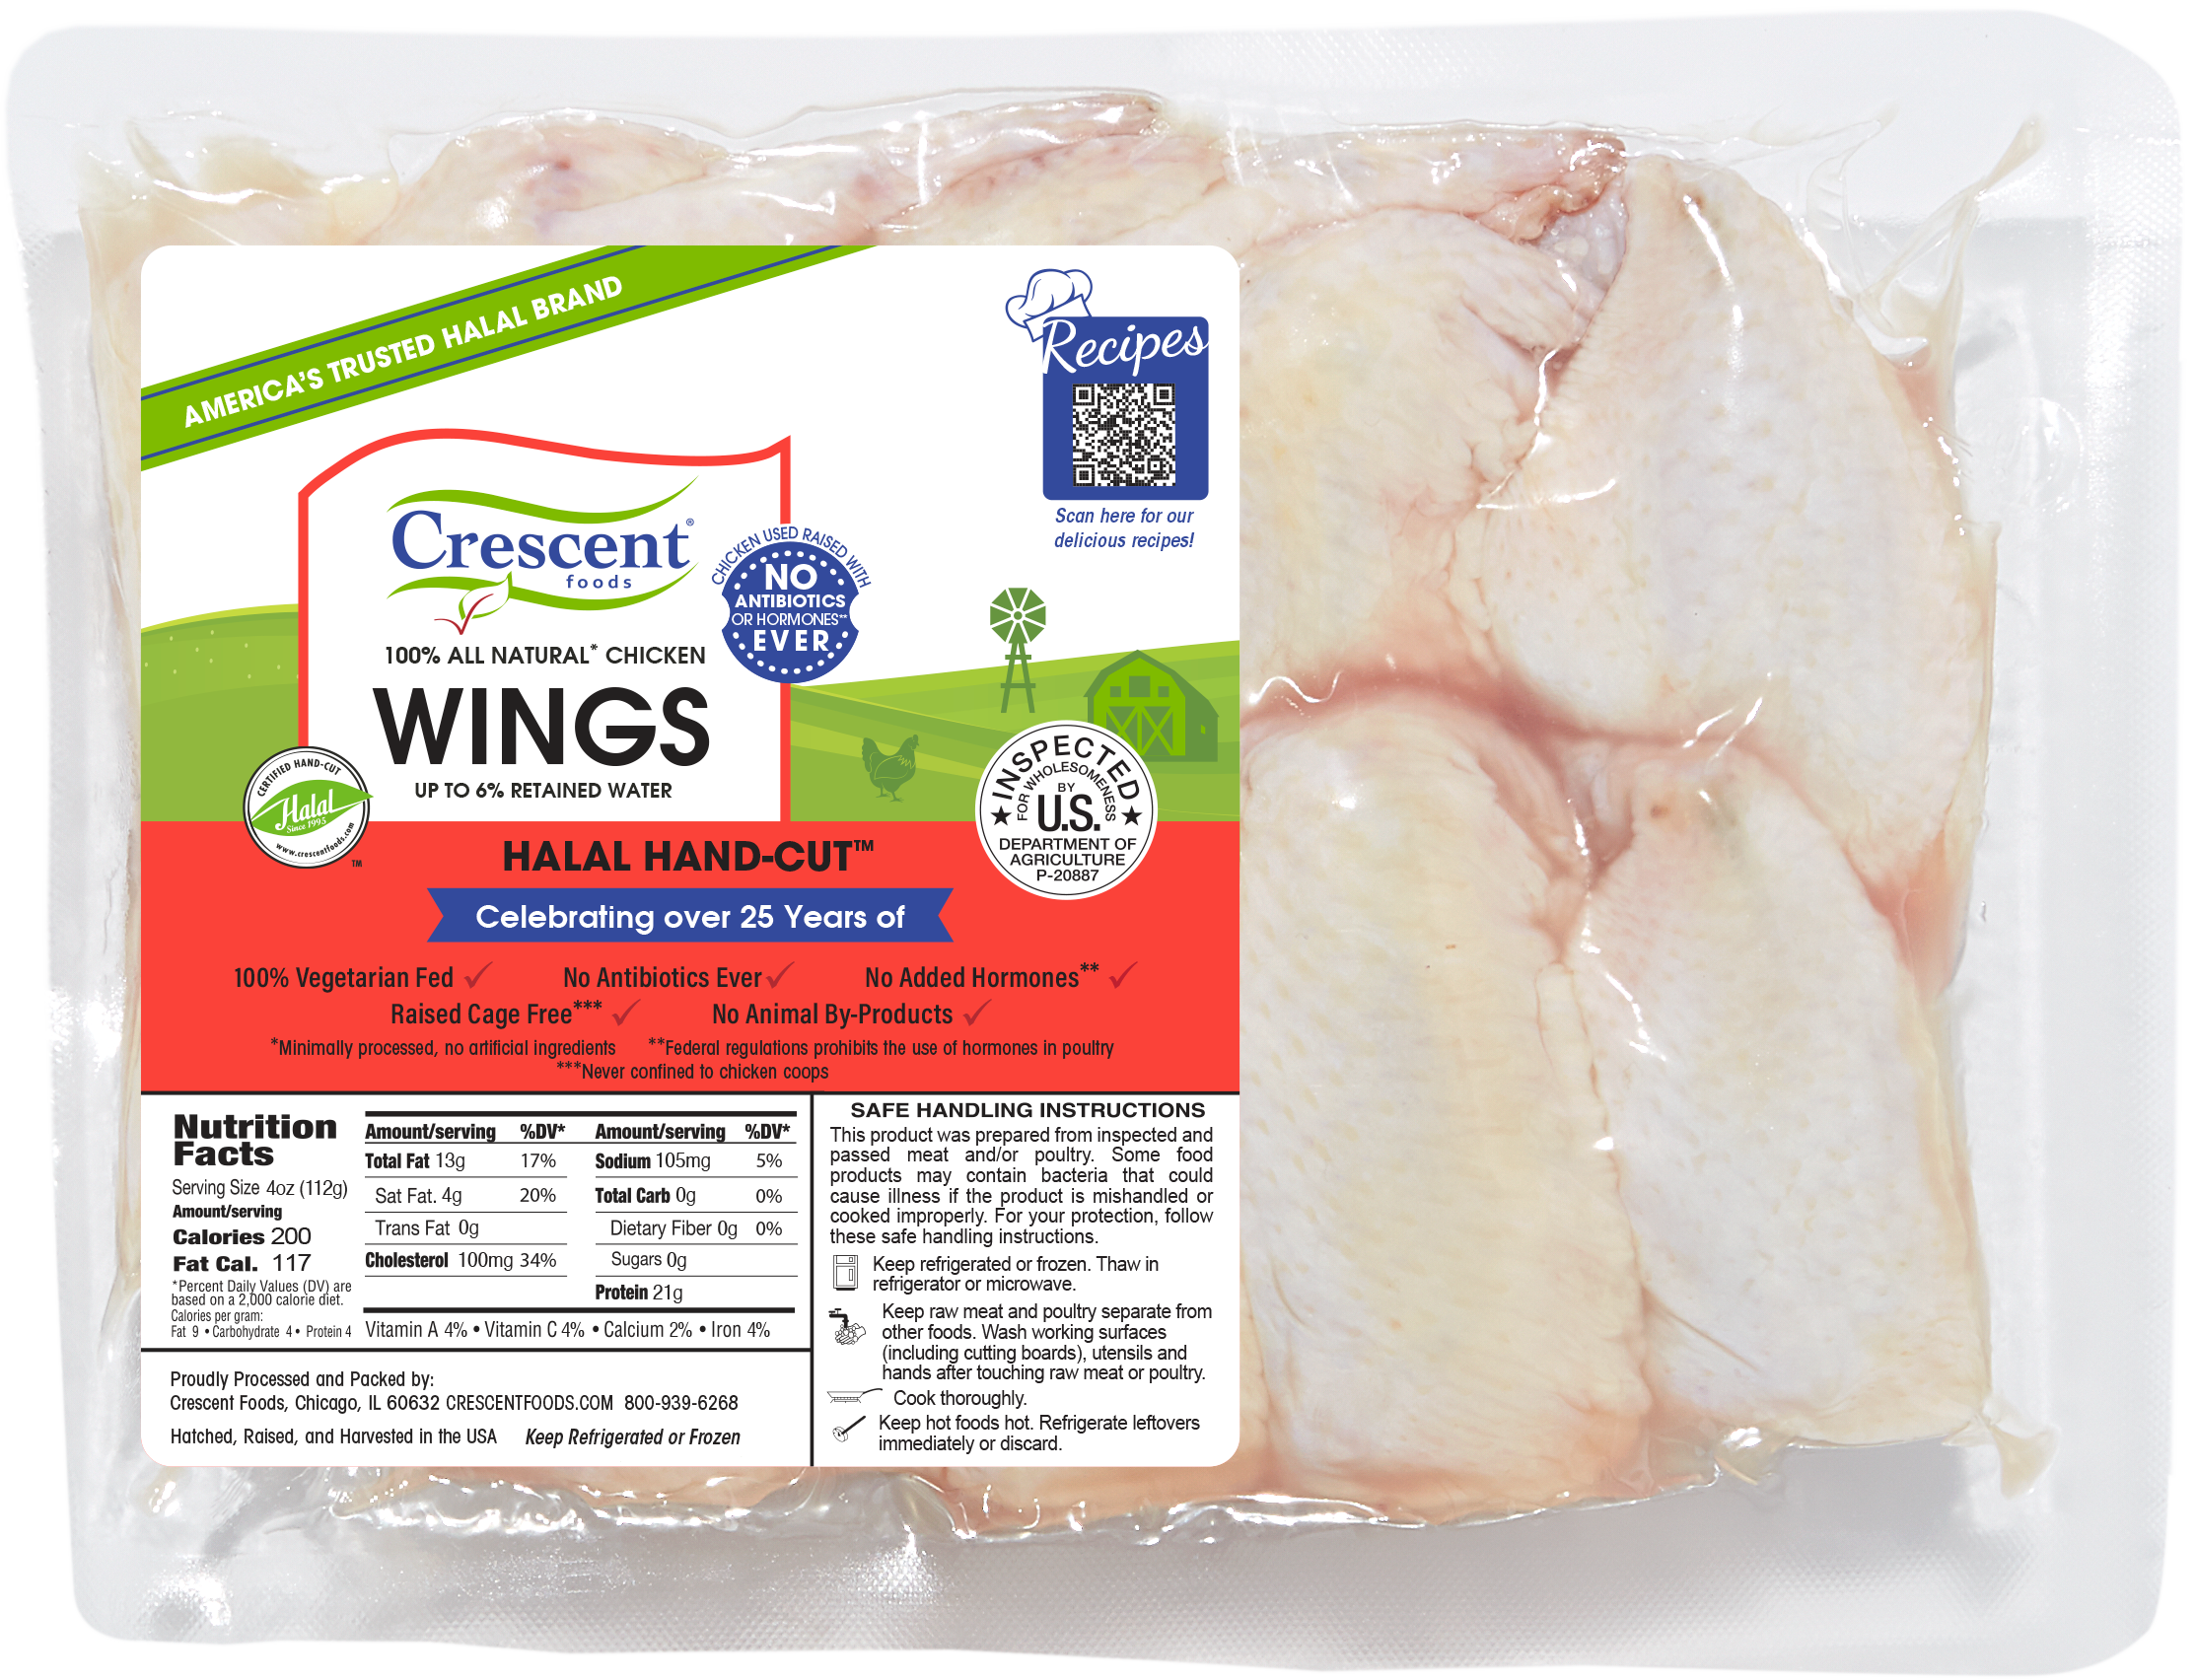 Crescent Foods Chicken WIngs in packaging